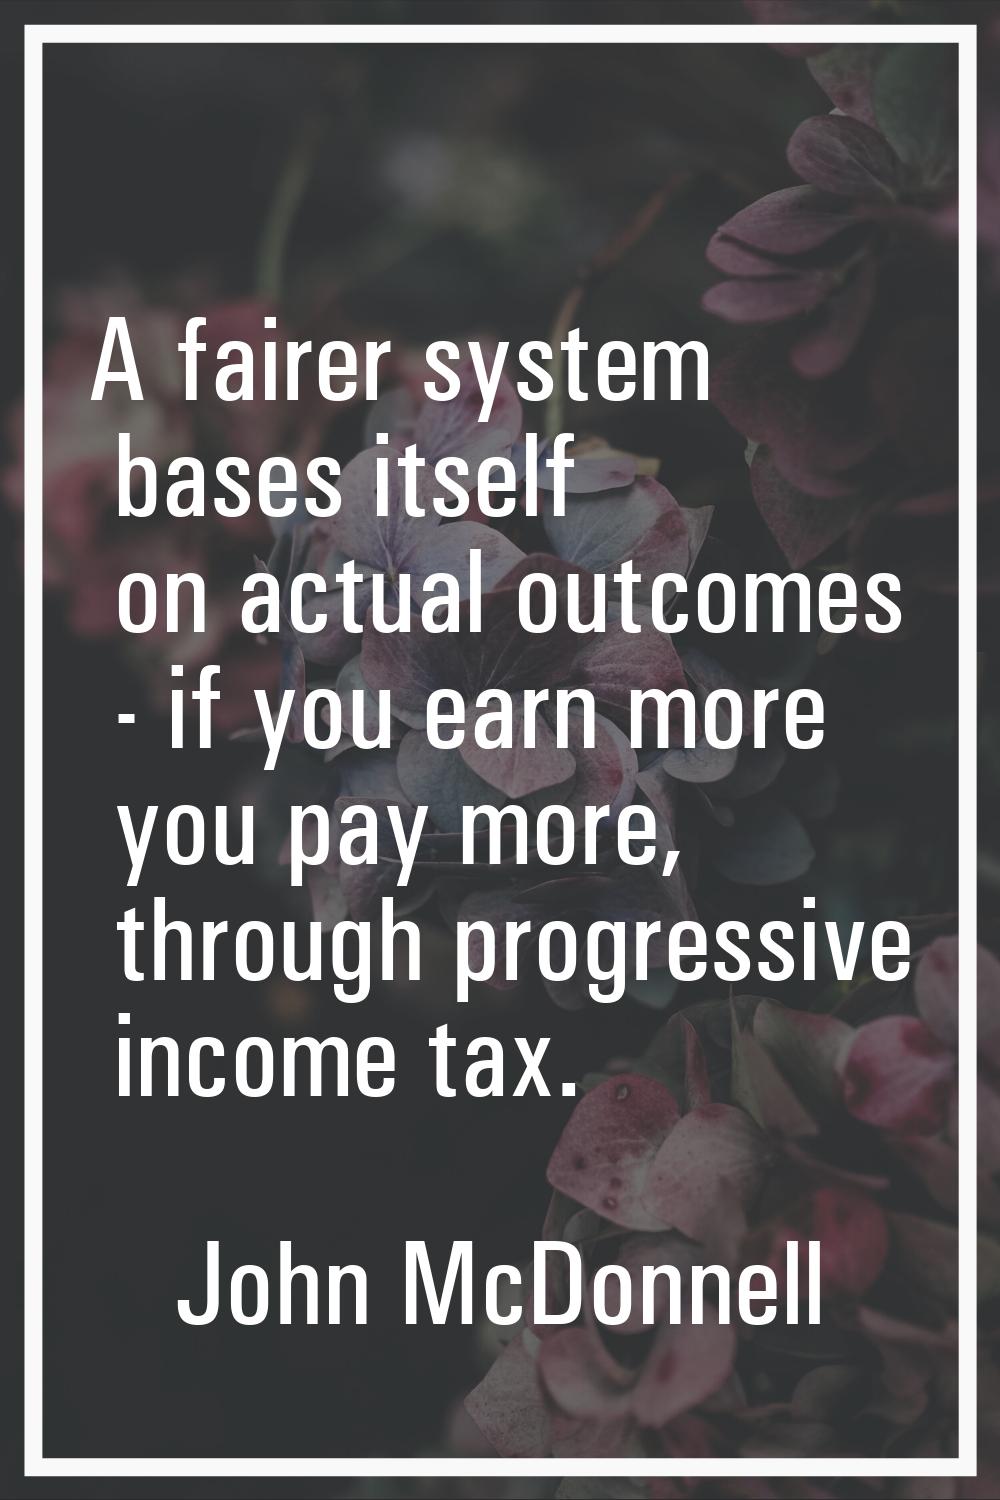 A fairer system bases itself on actual outcomes - if you earn more you pay more, through progressiv